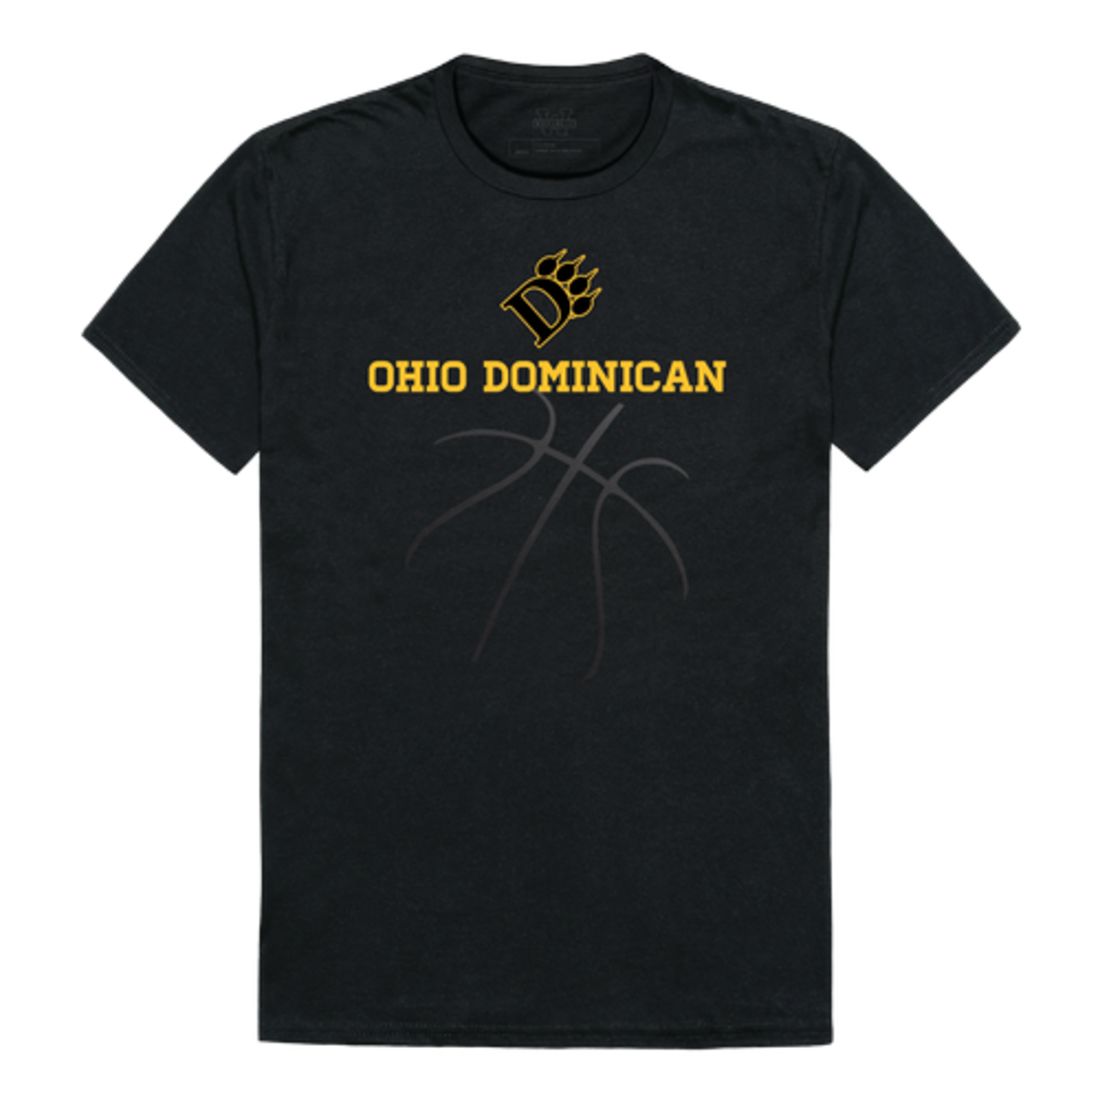 Ohio Dominican University Panthers Basketball T-Shirt Tee